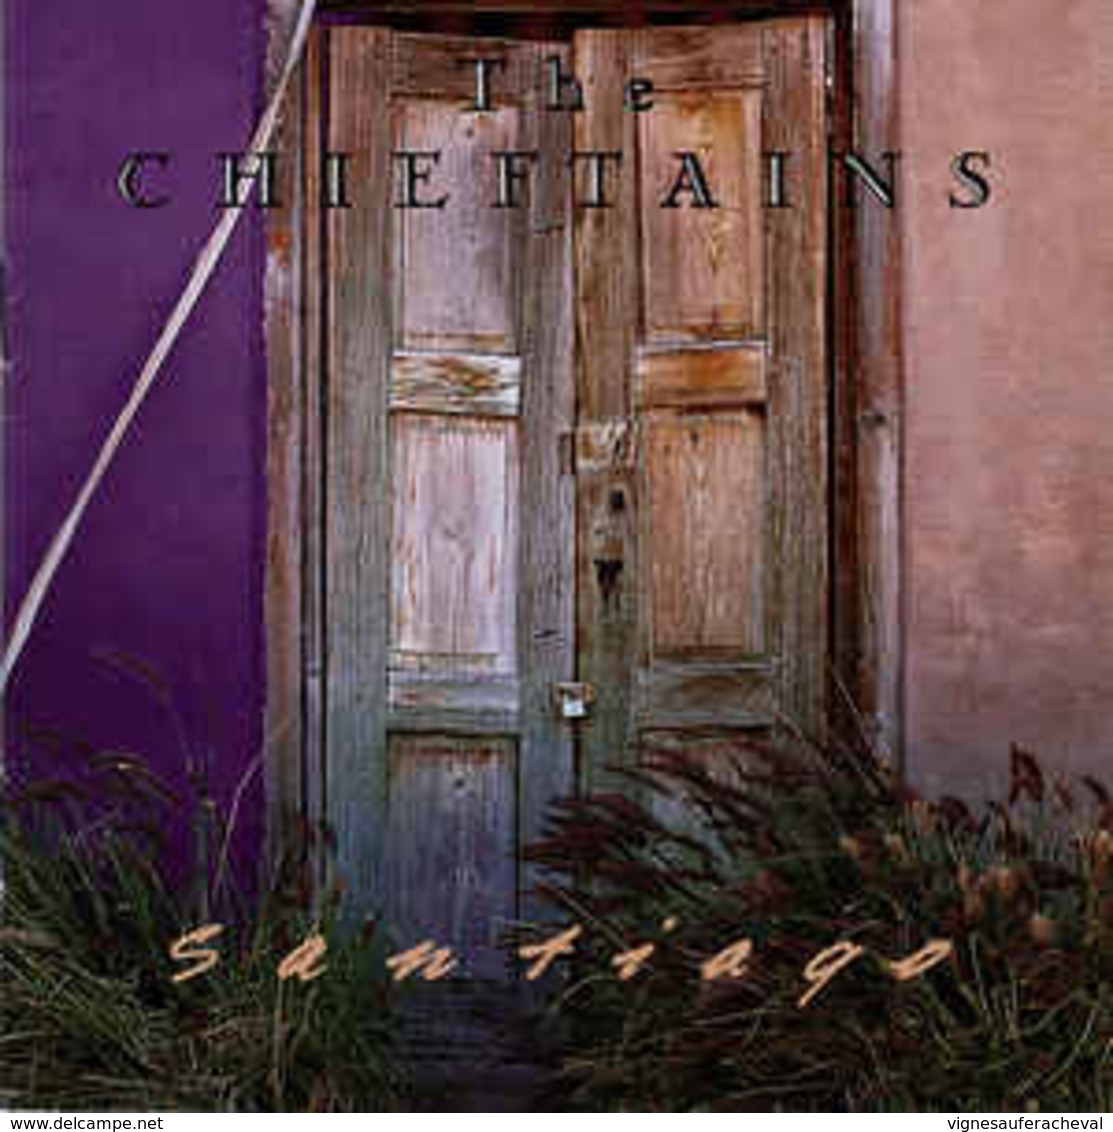 The Chieftains. Santiago - World Music